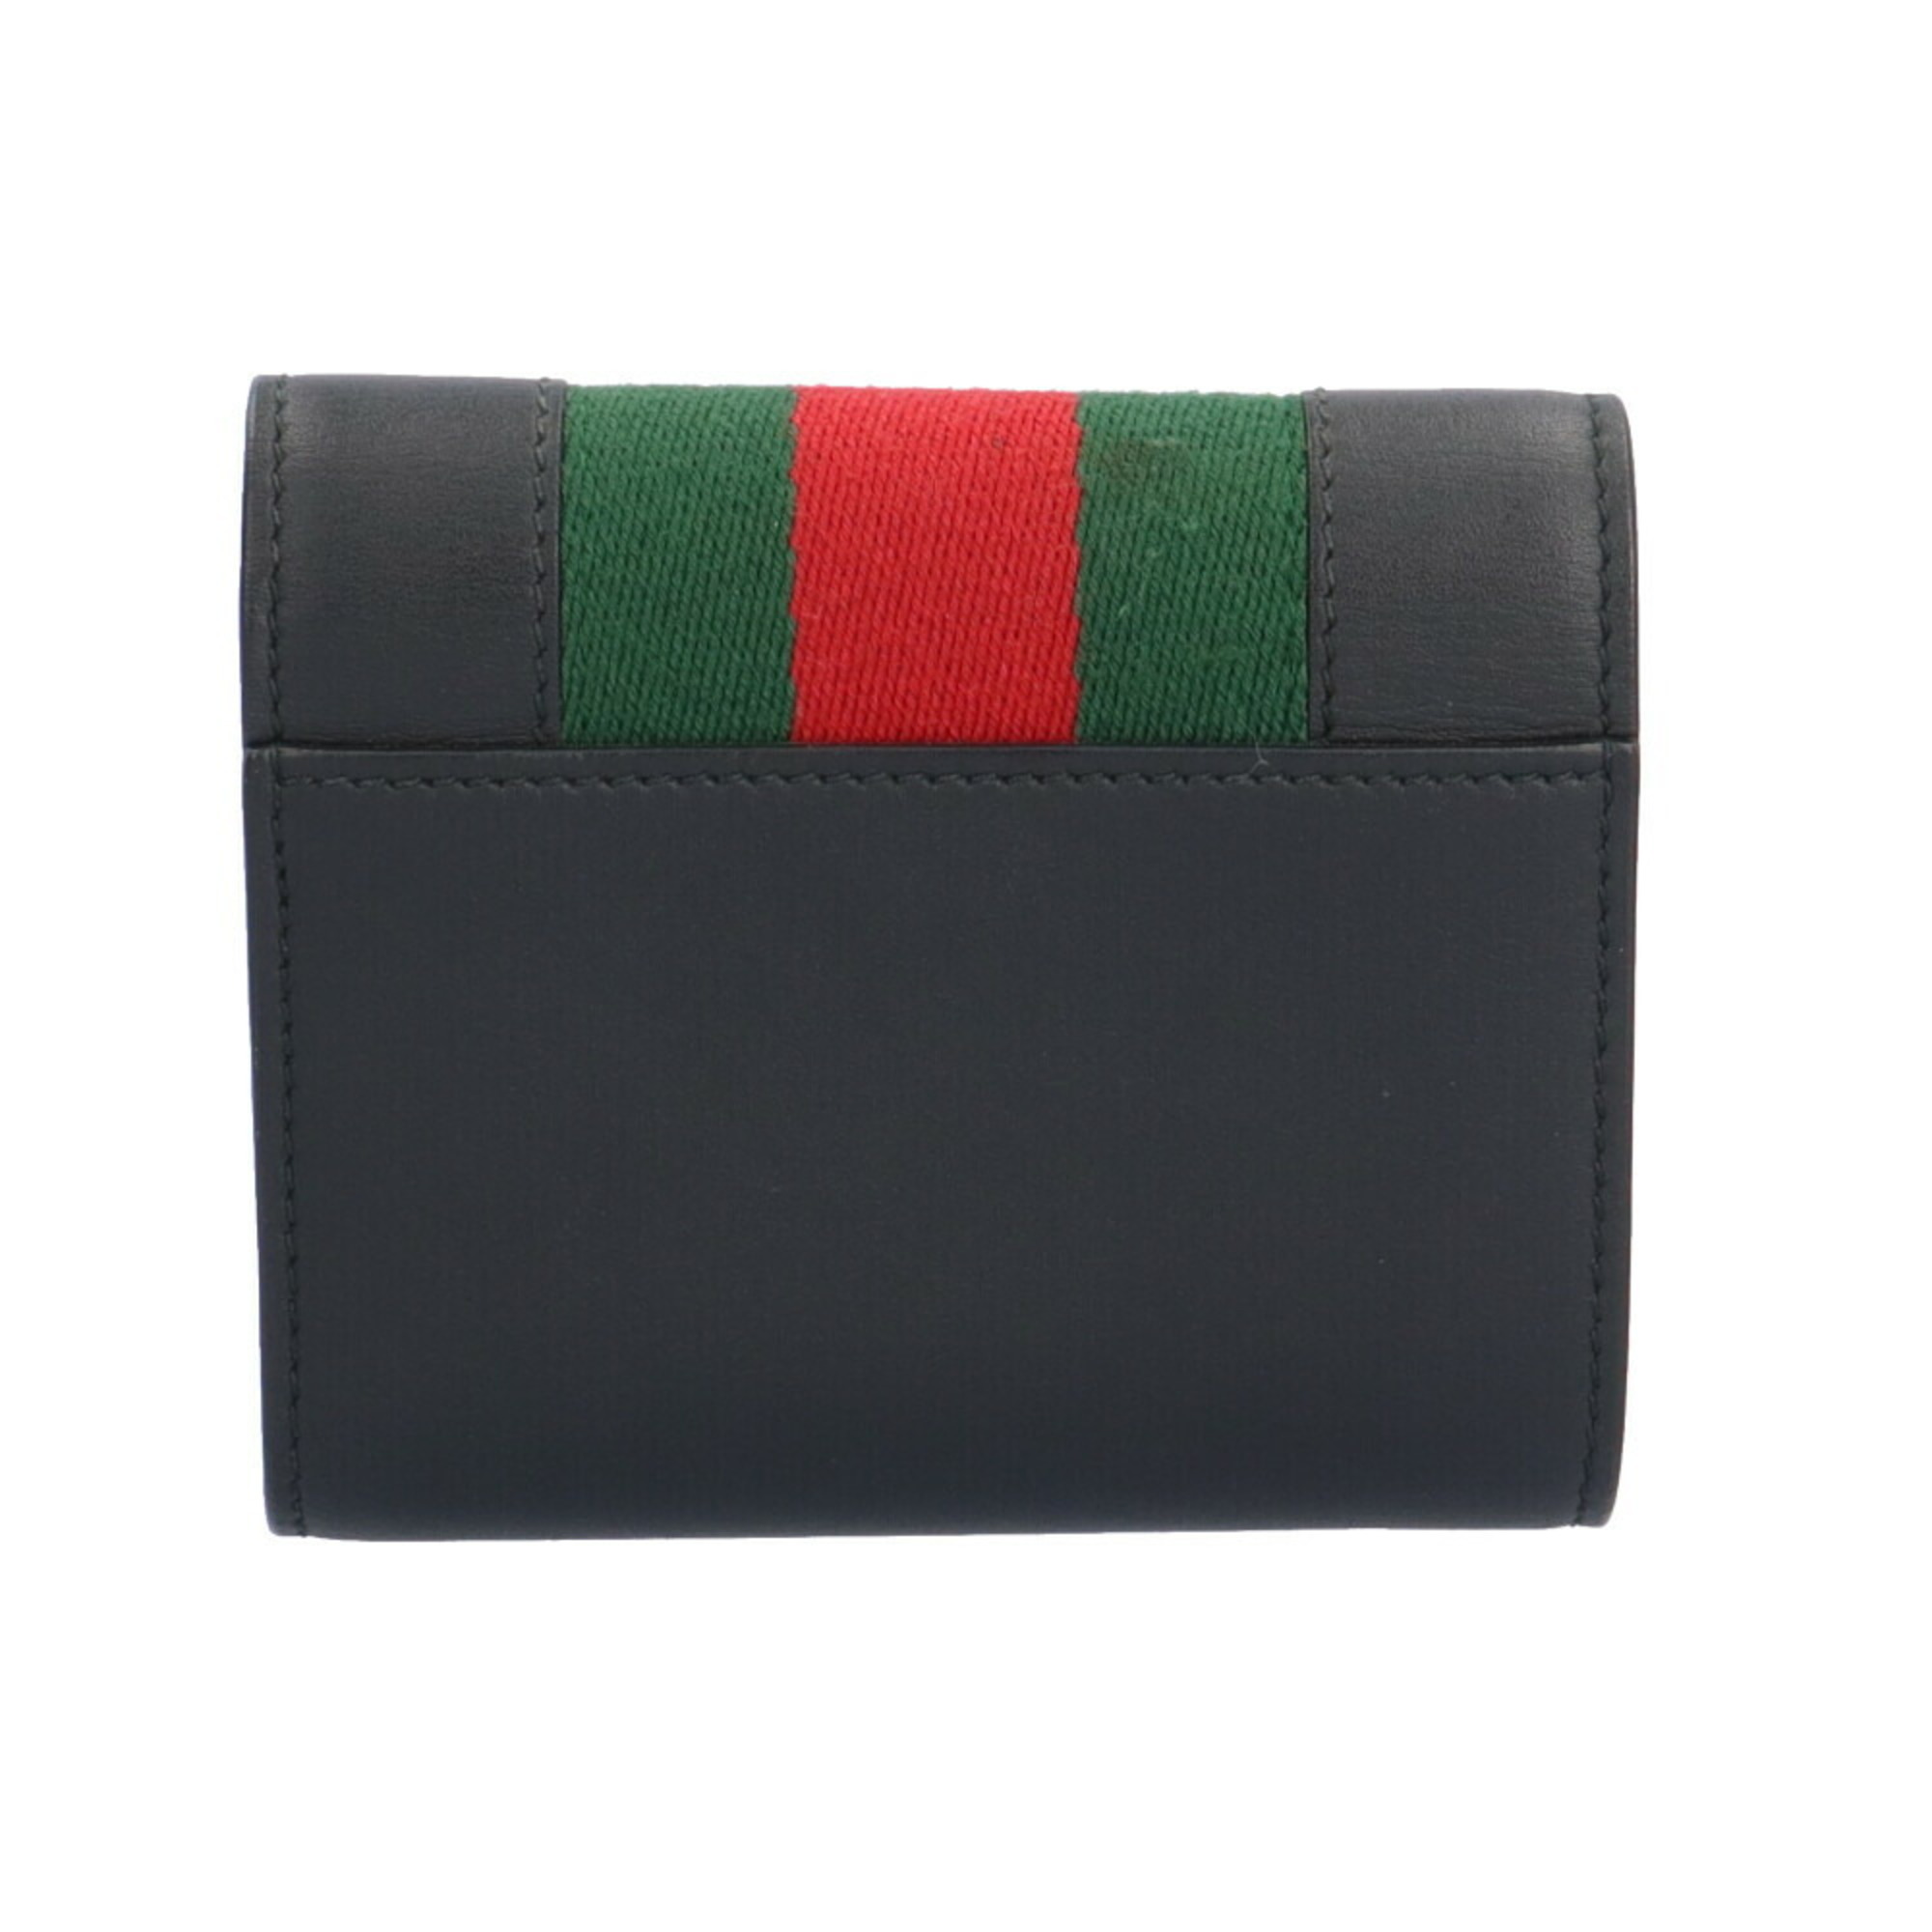 Gucci Sylvie Sherry Line Trifold Wallet Leather 476081 Women's GUCCI